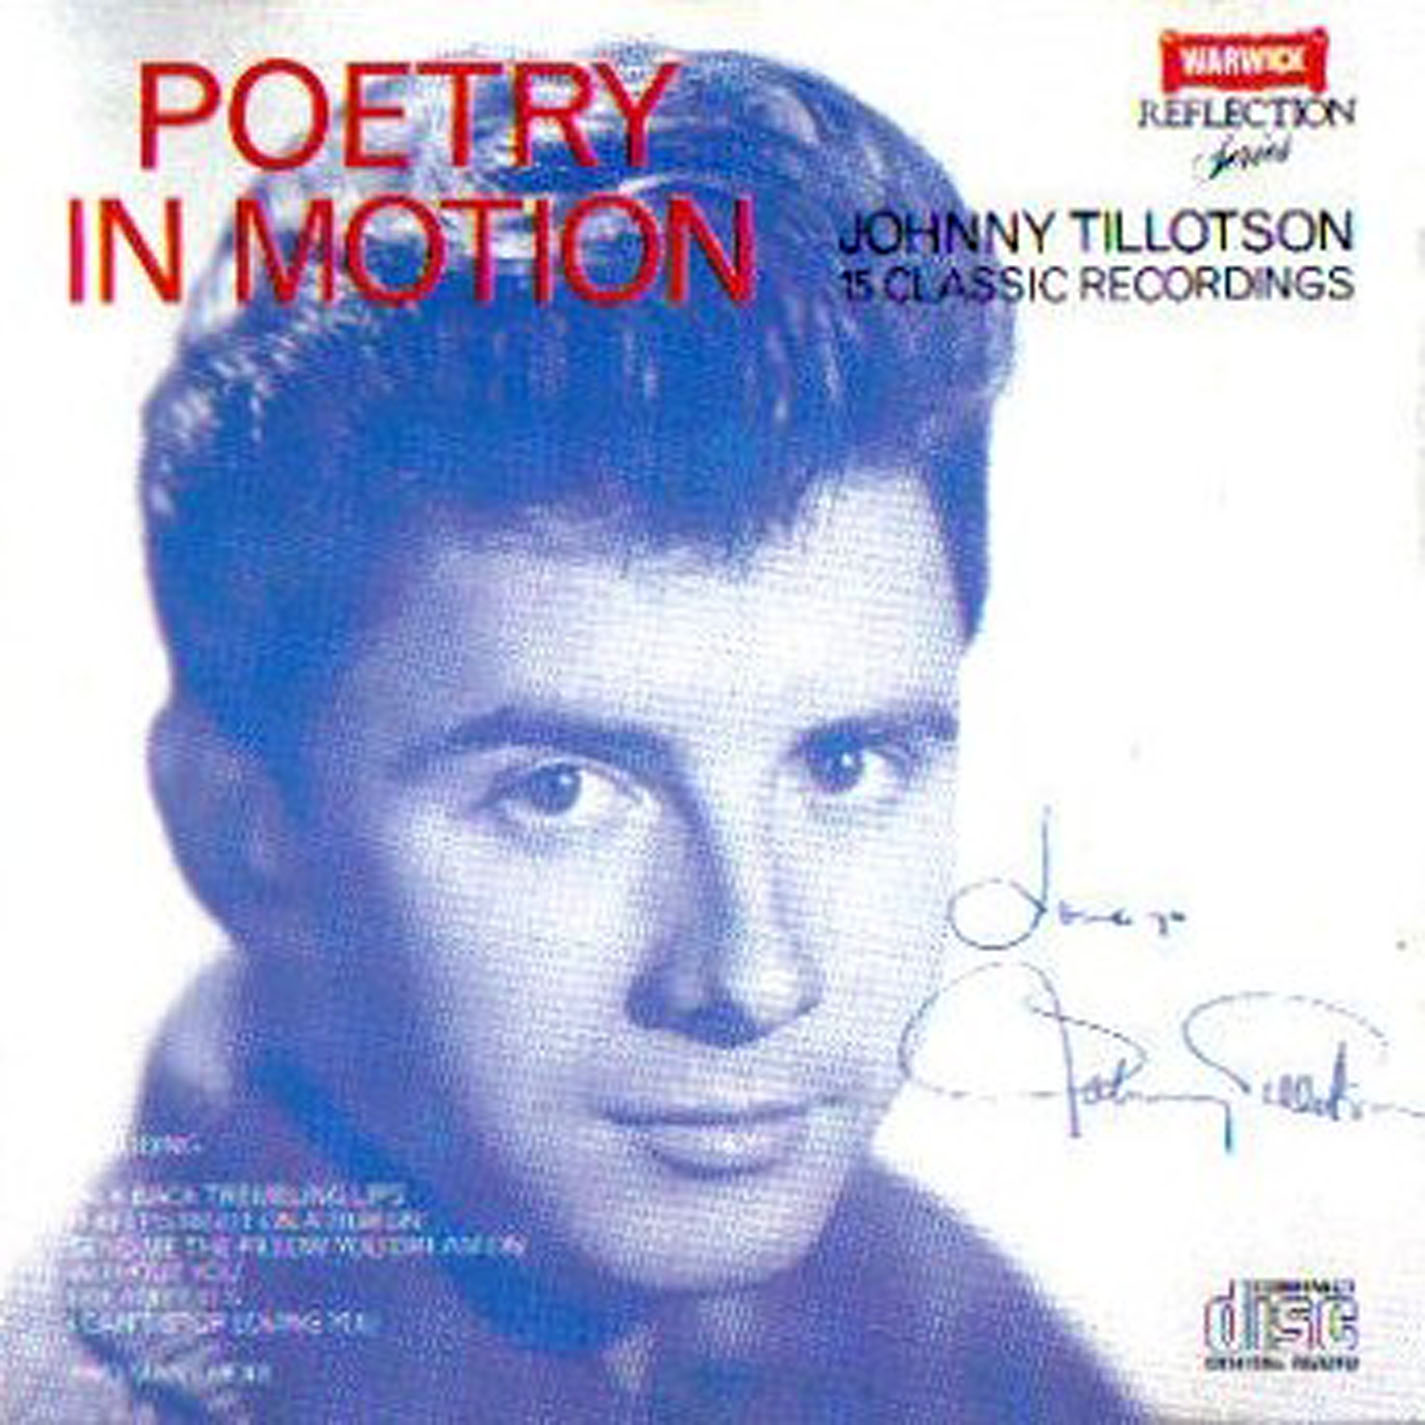 Johnny Tillotson - Poetry In Motion - 15 Classic Recordings